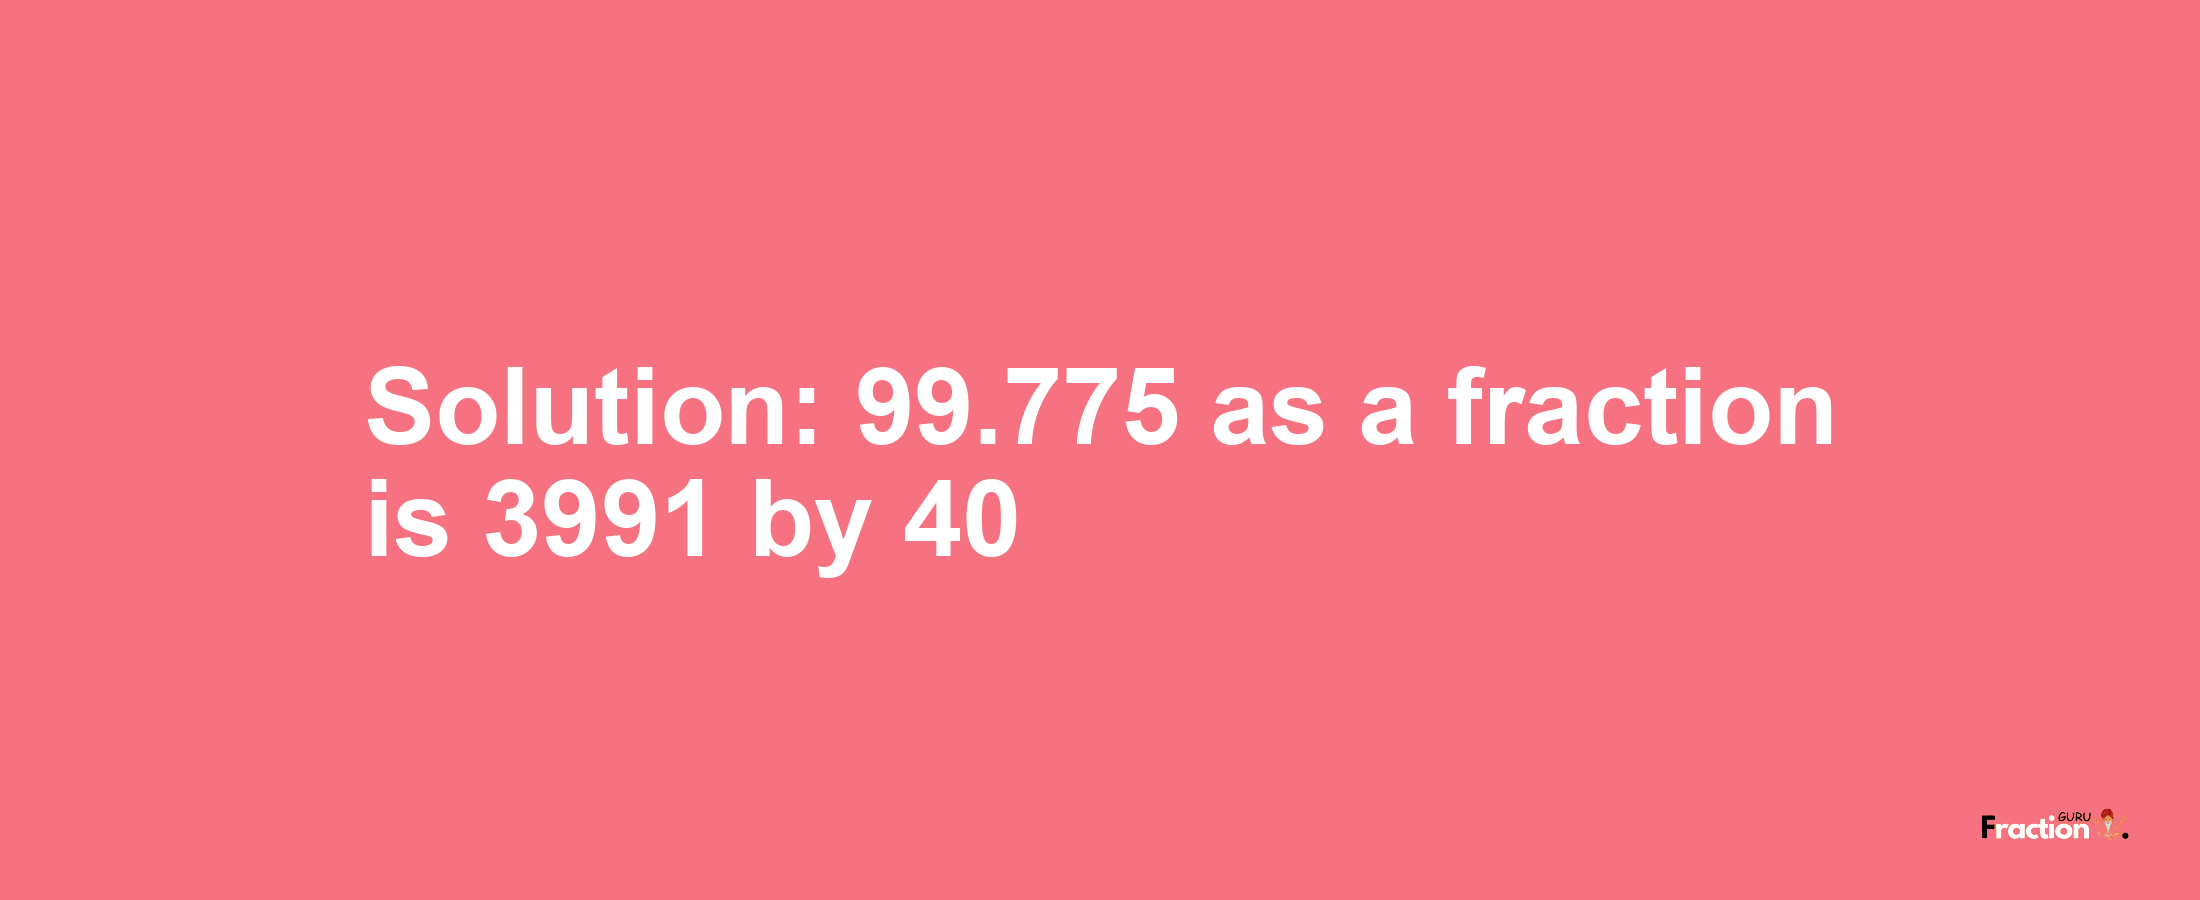 Solution:99.775 as a fraction is 3991/40